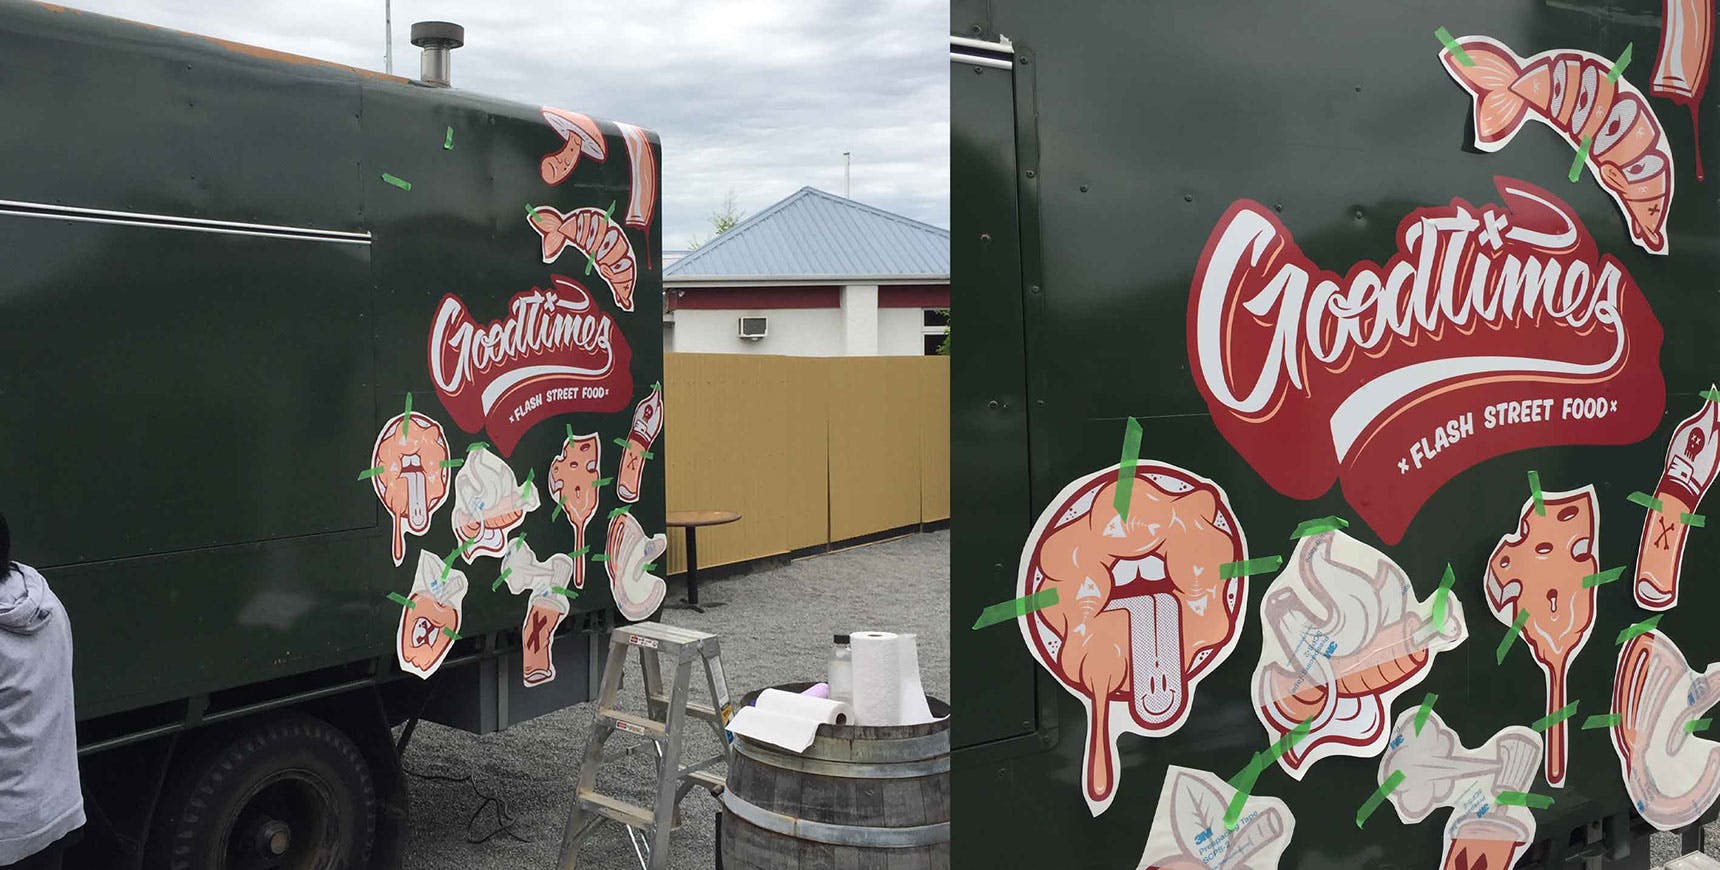 Goodtimes Foodtruck Graphic Decal Design Application